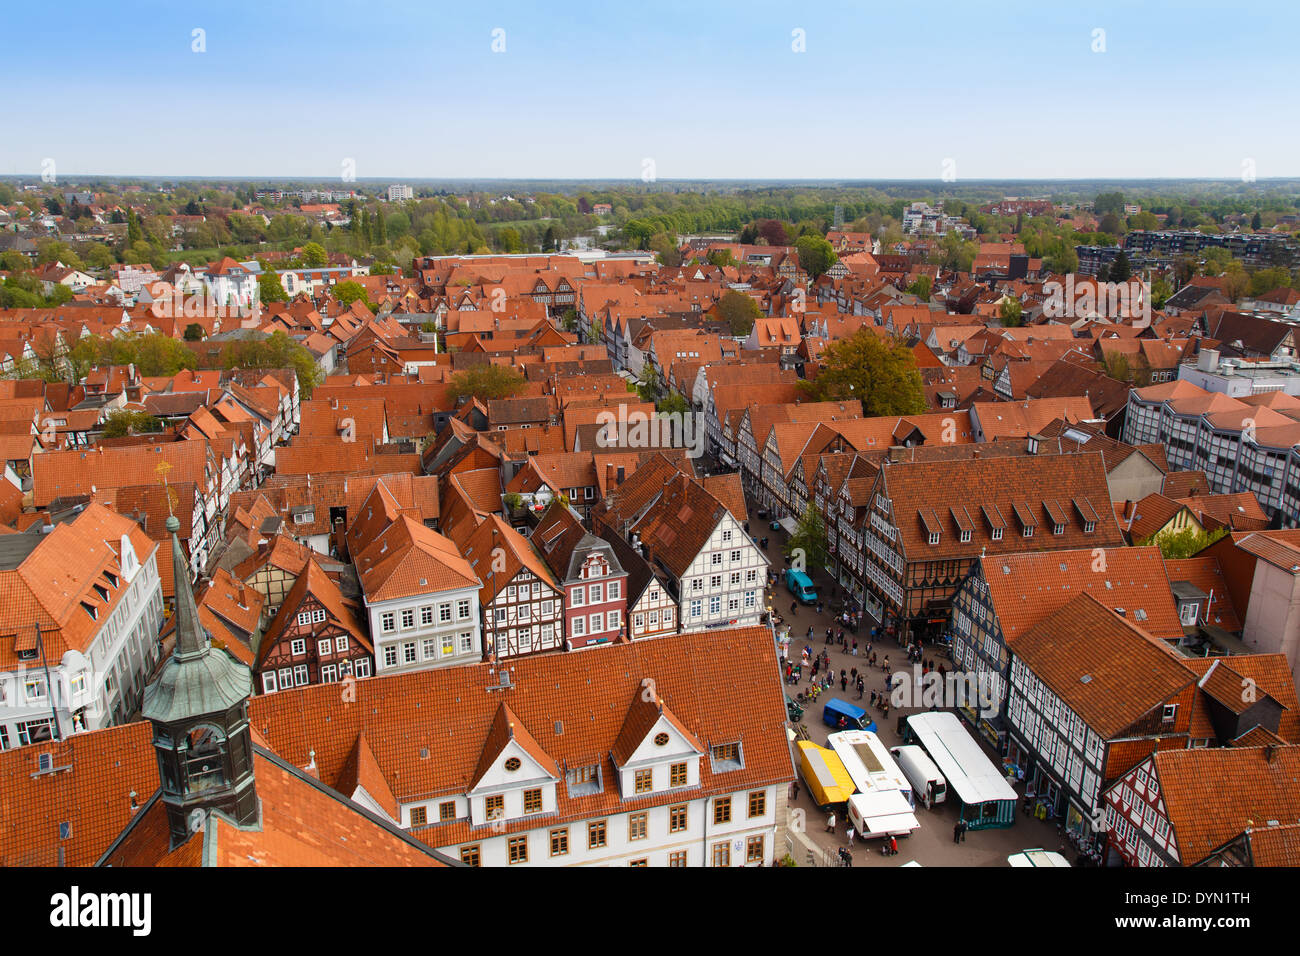 Photograph of the rooftops of Celle taken from the top of the city church (Stadtkirche). Stock Photo